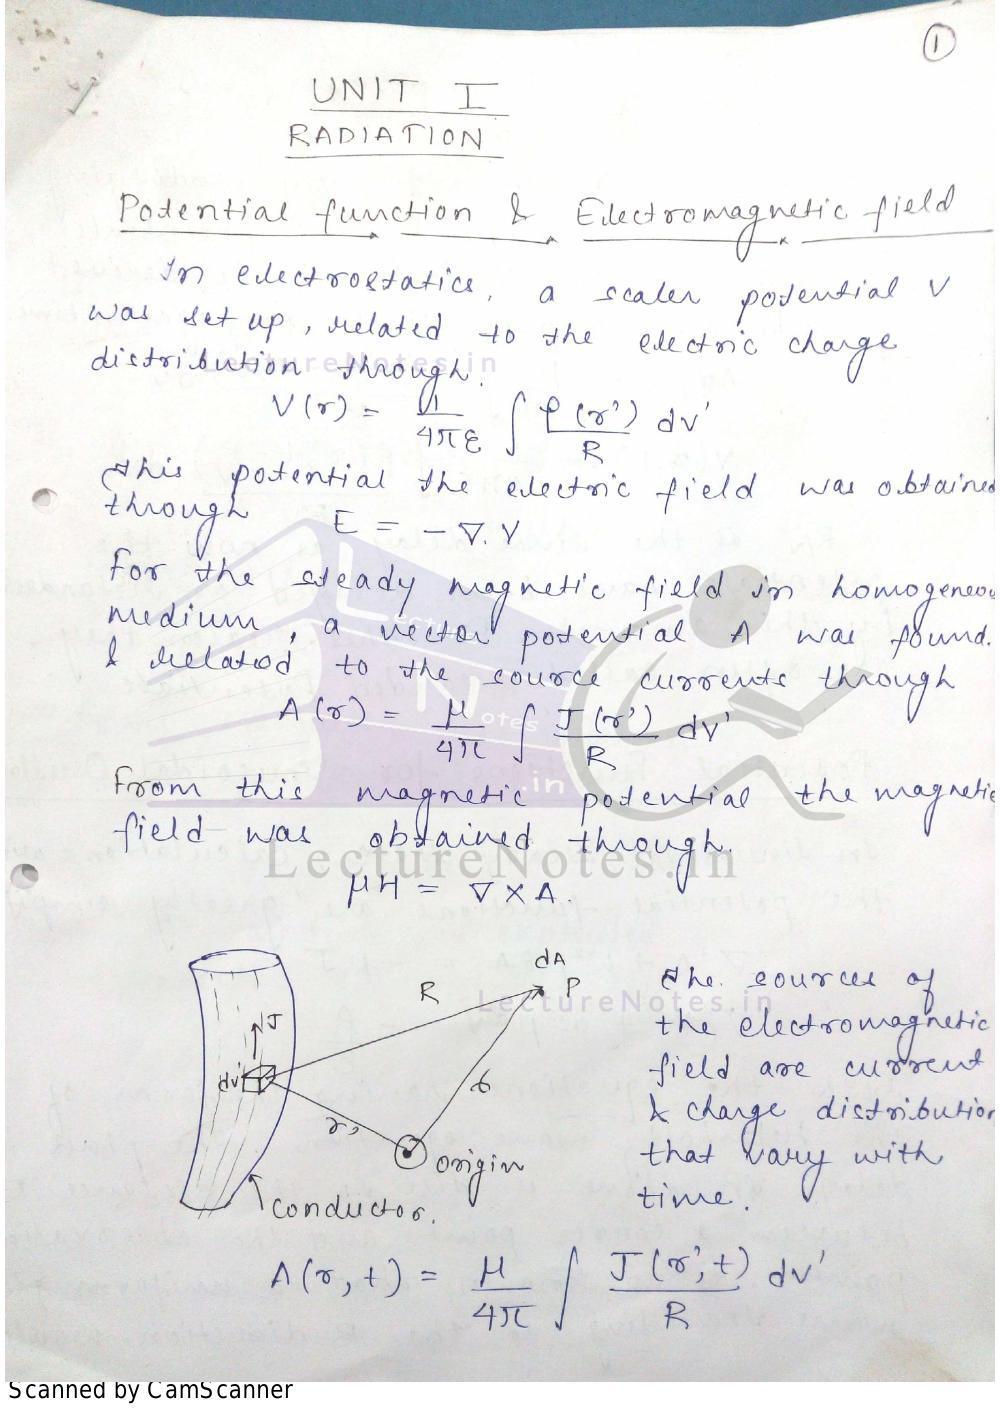 radio wave propagation book and lecture notes